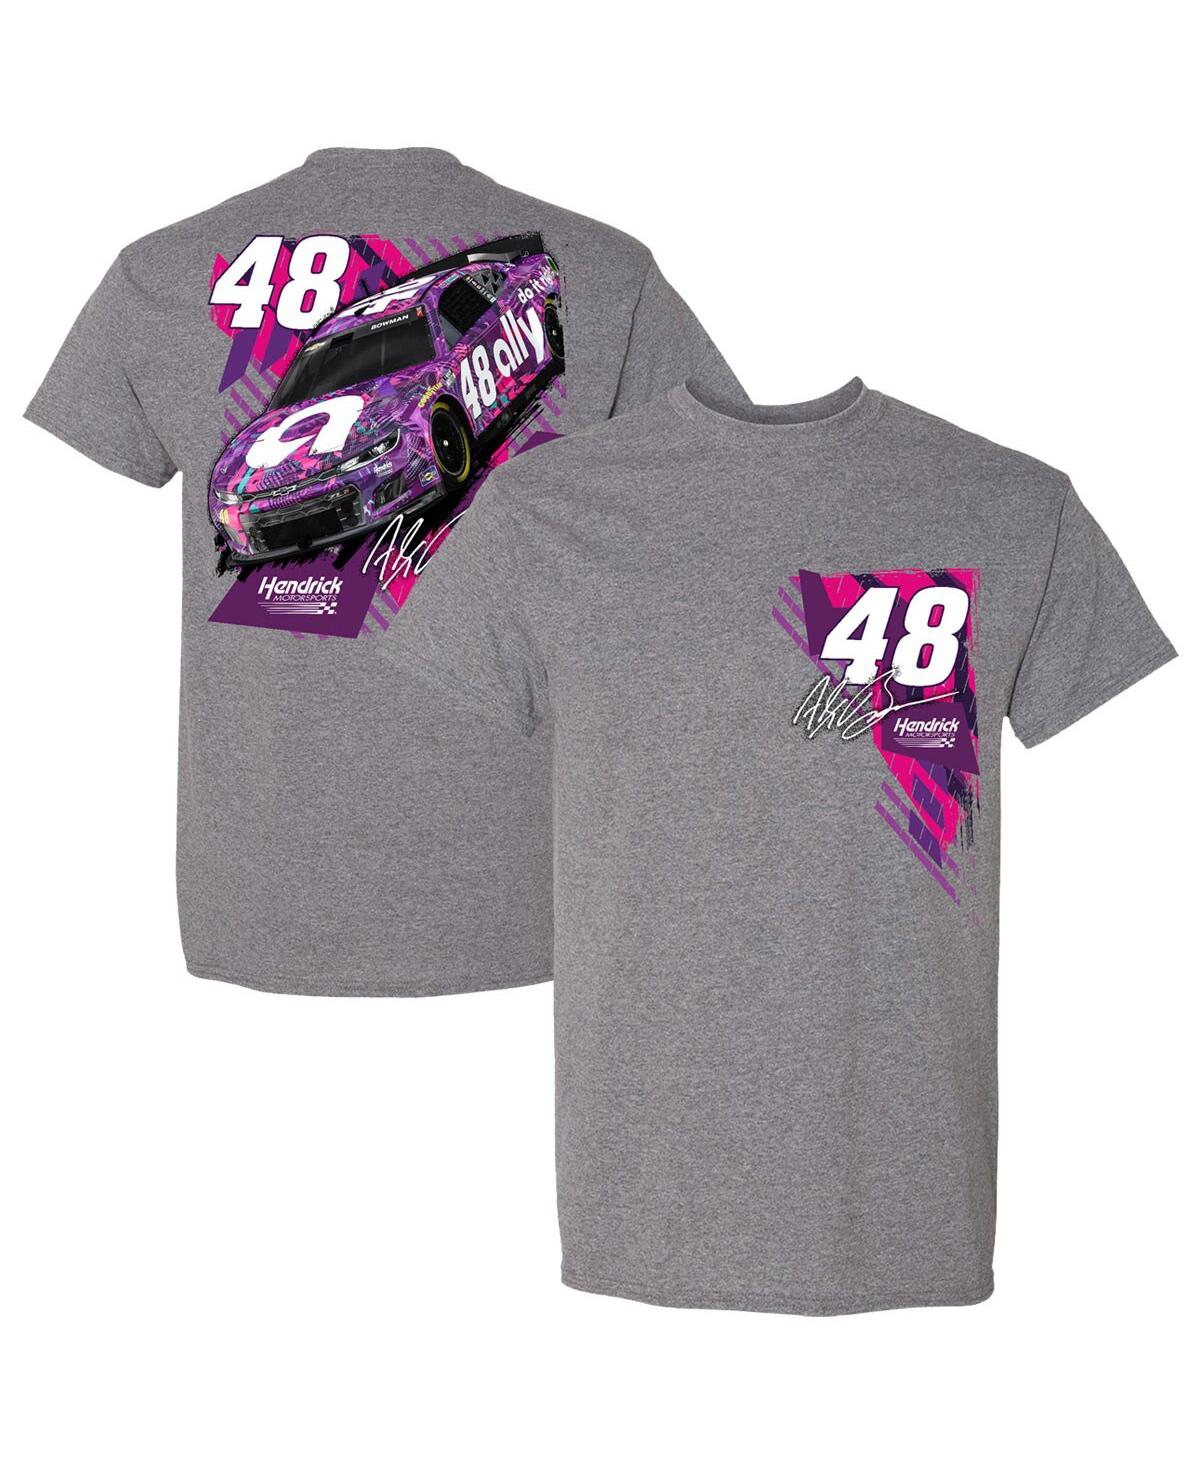 Men's Hendrick Motorsports Team Collection Heather Charcoal Alex Bowman Ally T-shirt - Heather Charcoal